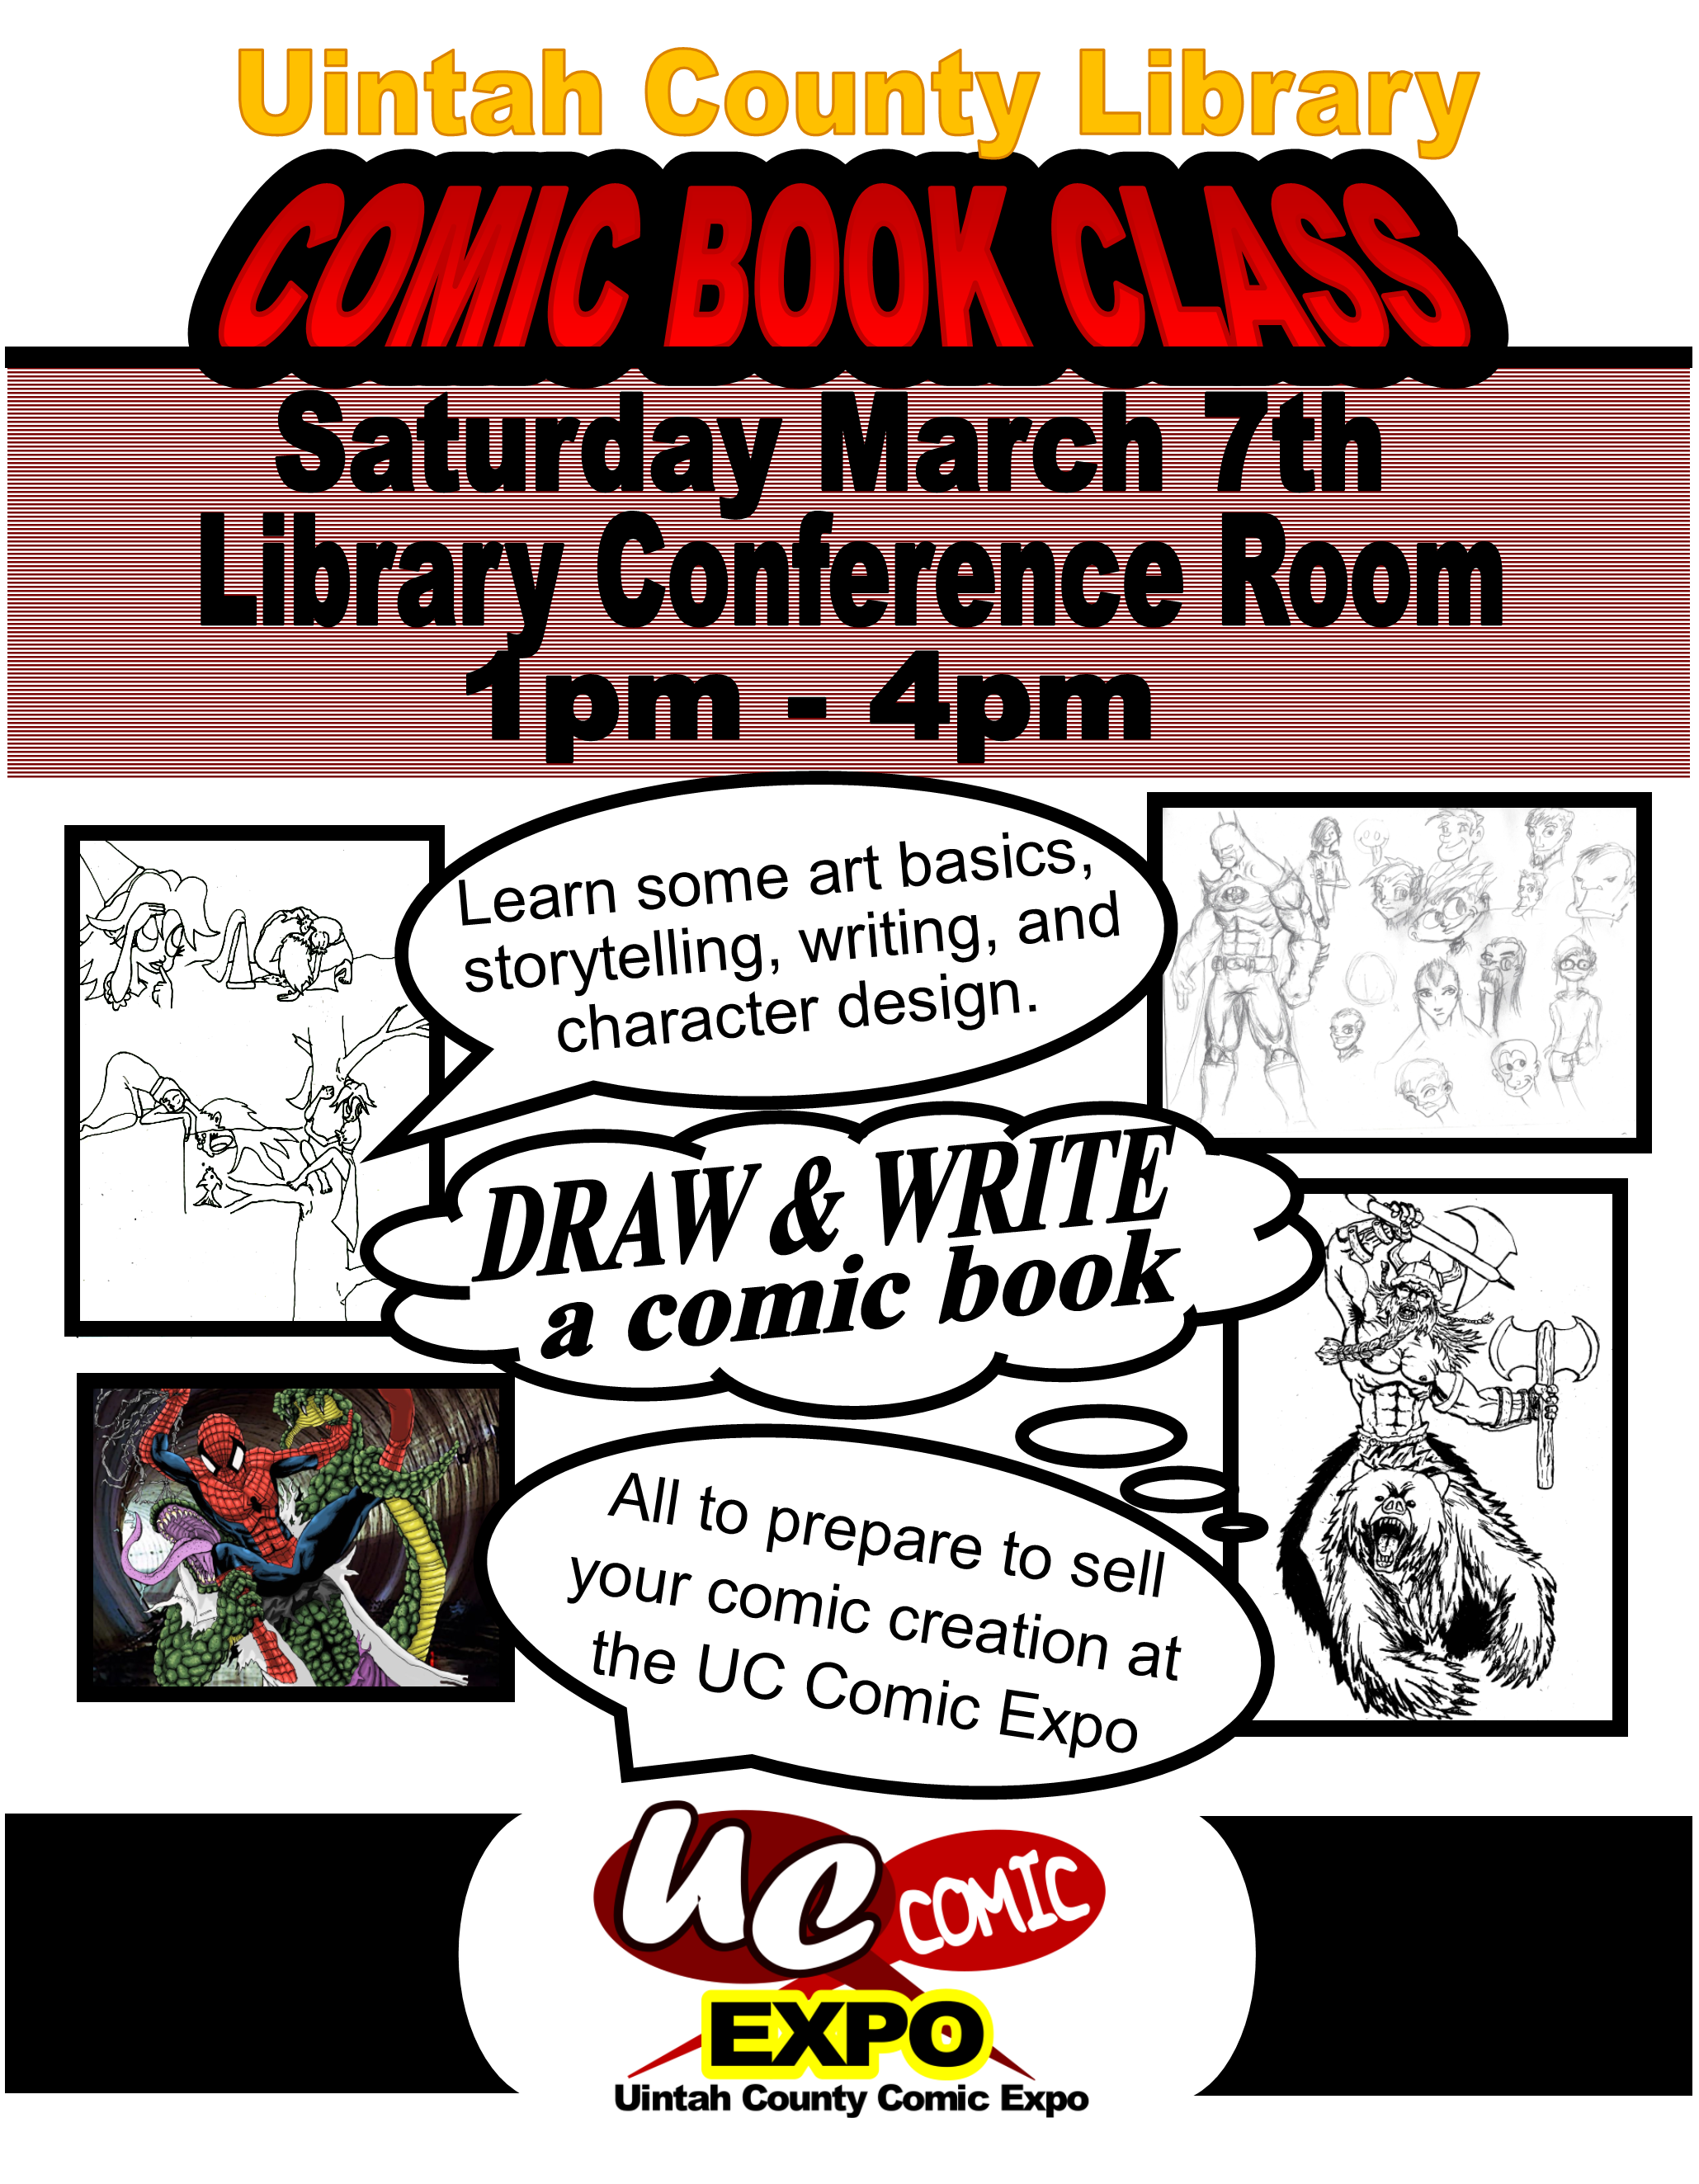 Uintah County Library presents Comic Book Class on Saturday March 7th from 1 to 4 p.m. in the Large Conference Room. Learn some art basics, storytelling, writing, and character design. Draw & Write a comic book. All to prepare to sell your comic creation at the UC Comic Expo